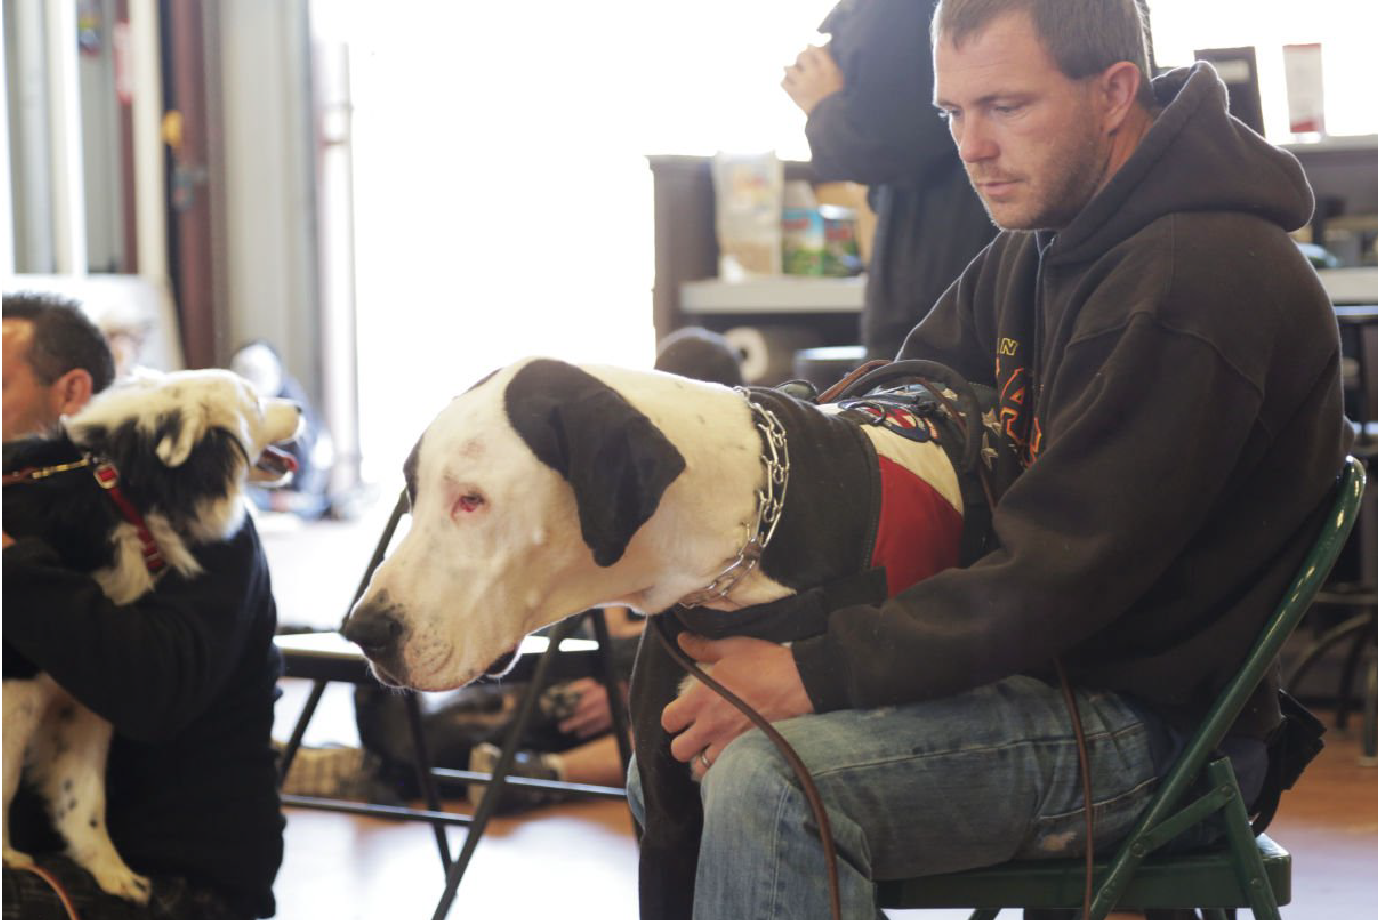 Nonprofit group provides service dogs, training to veterans with ...